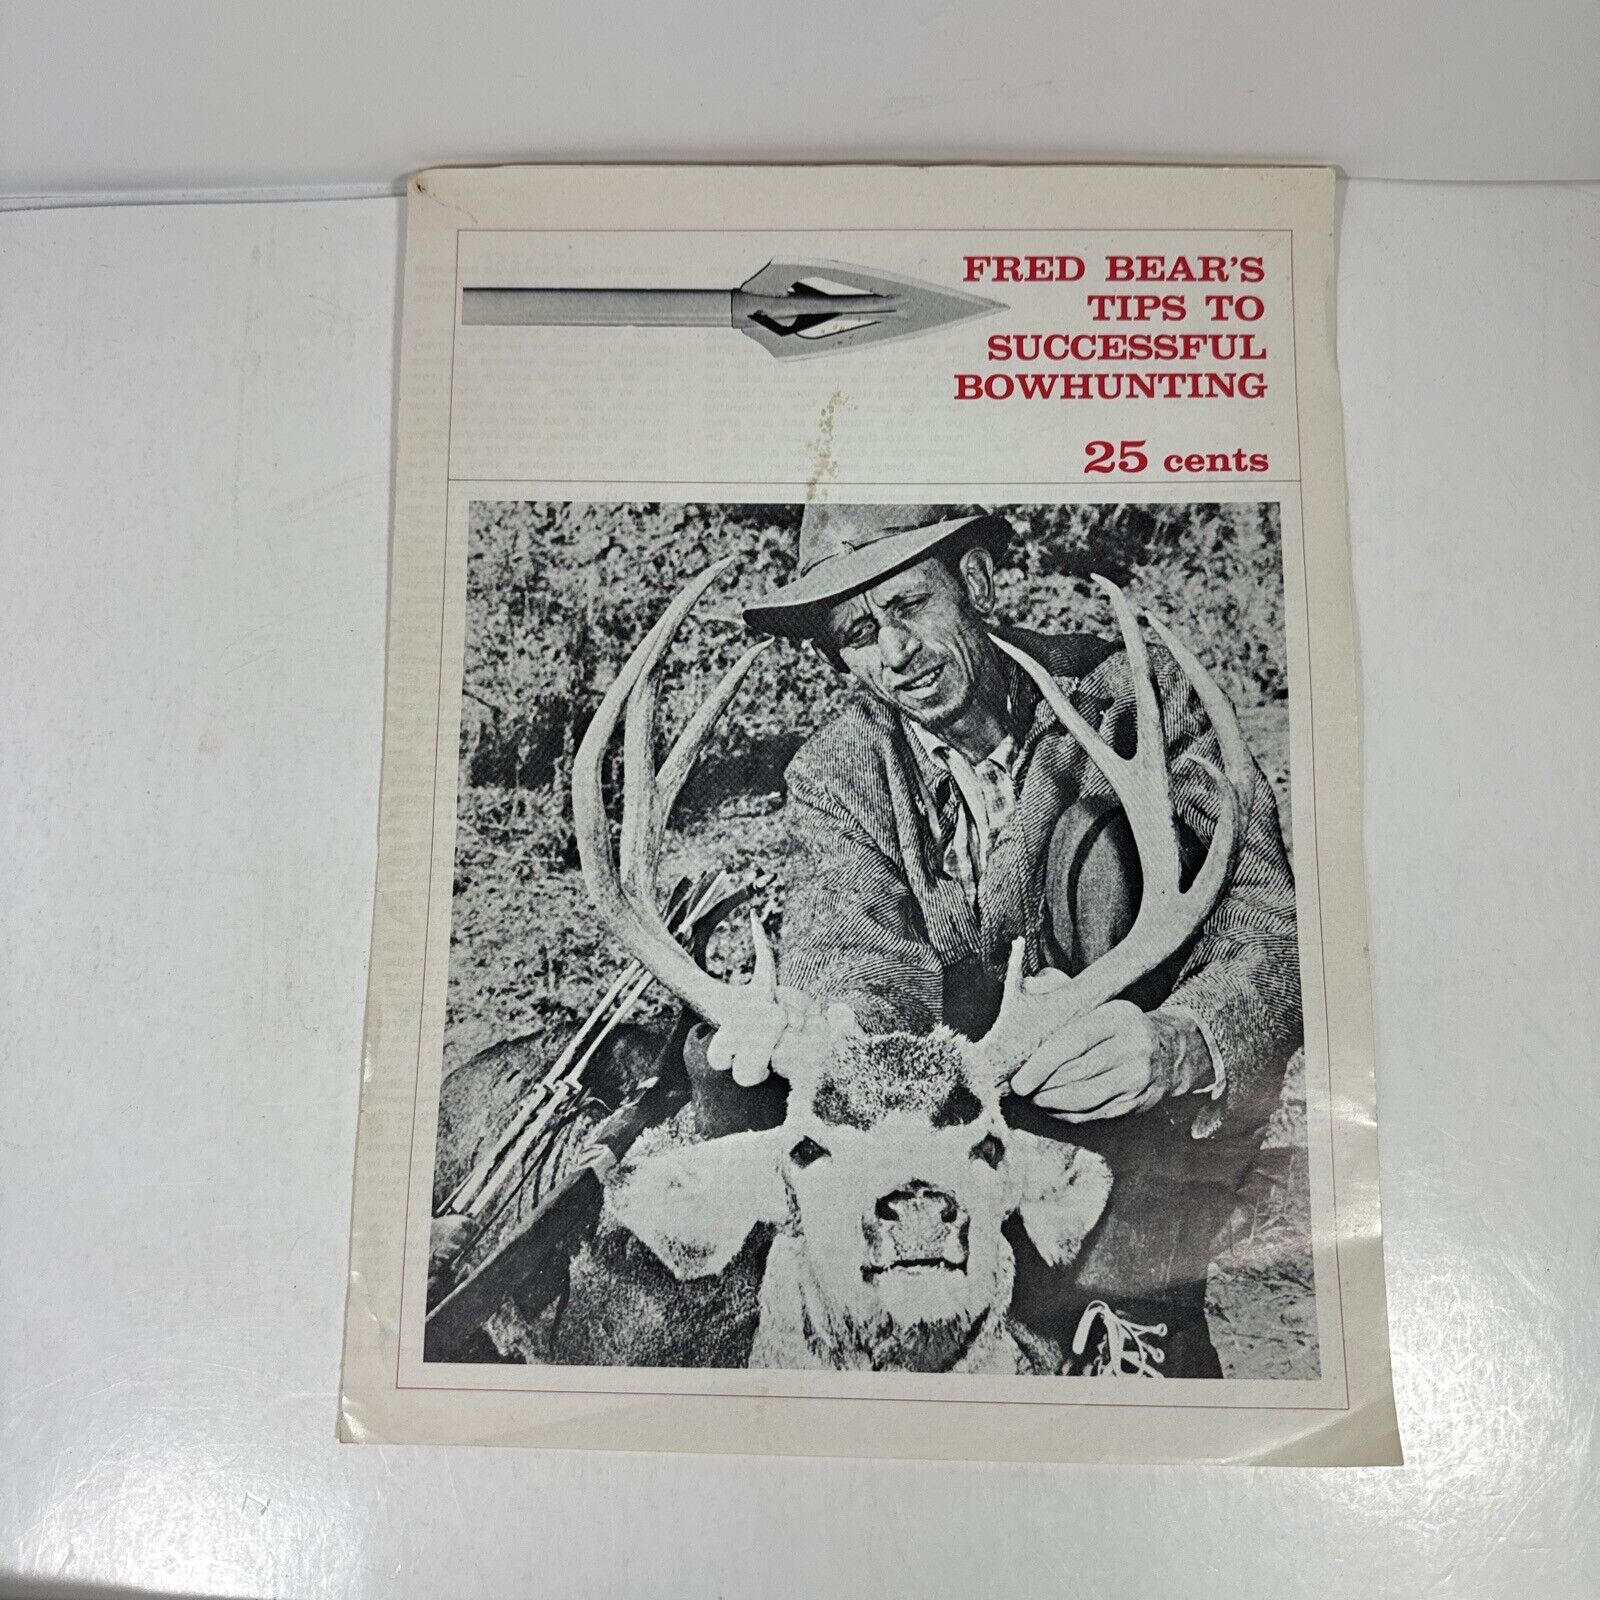 Vintage HTF Fred Bear’s Tips To Successful Bowhunting Brochure, Archery Hunting